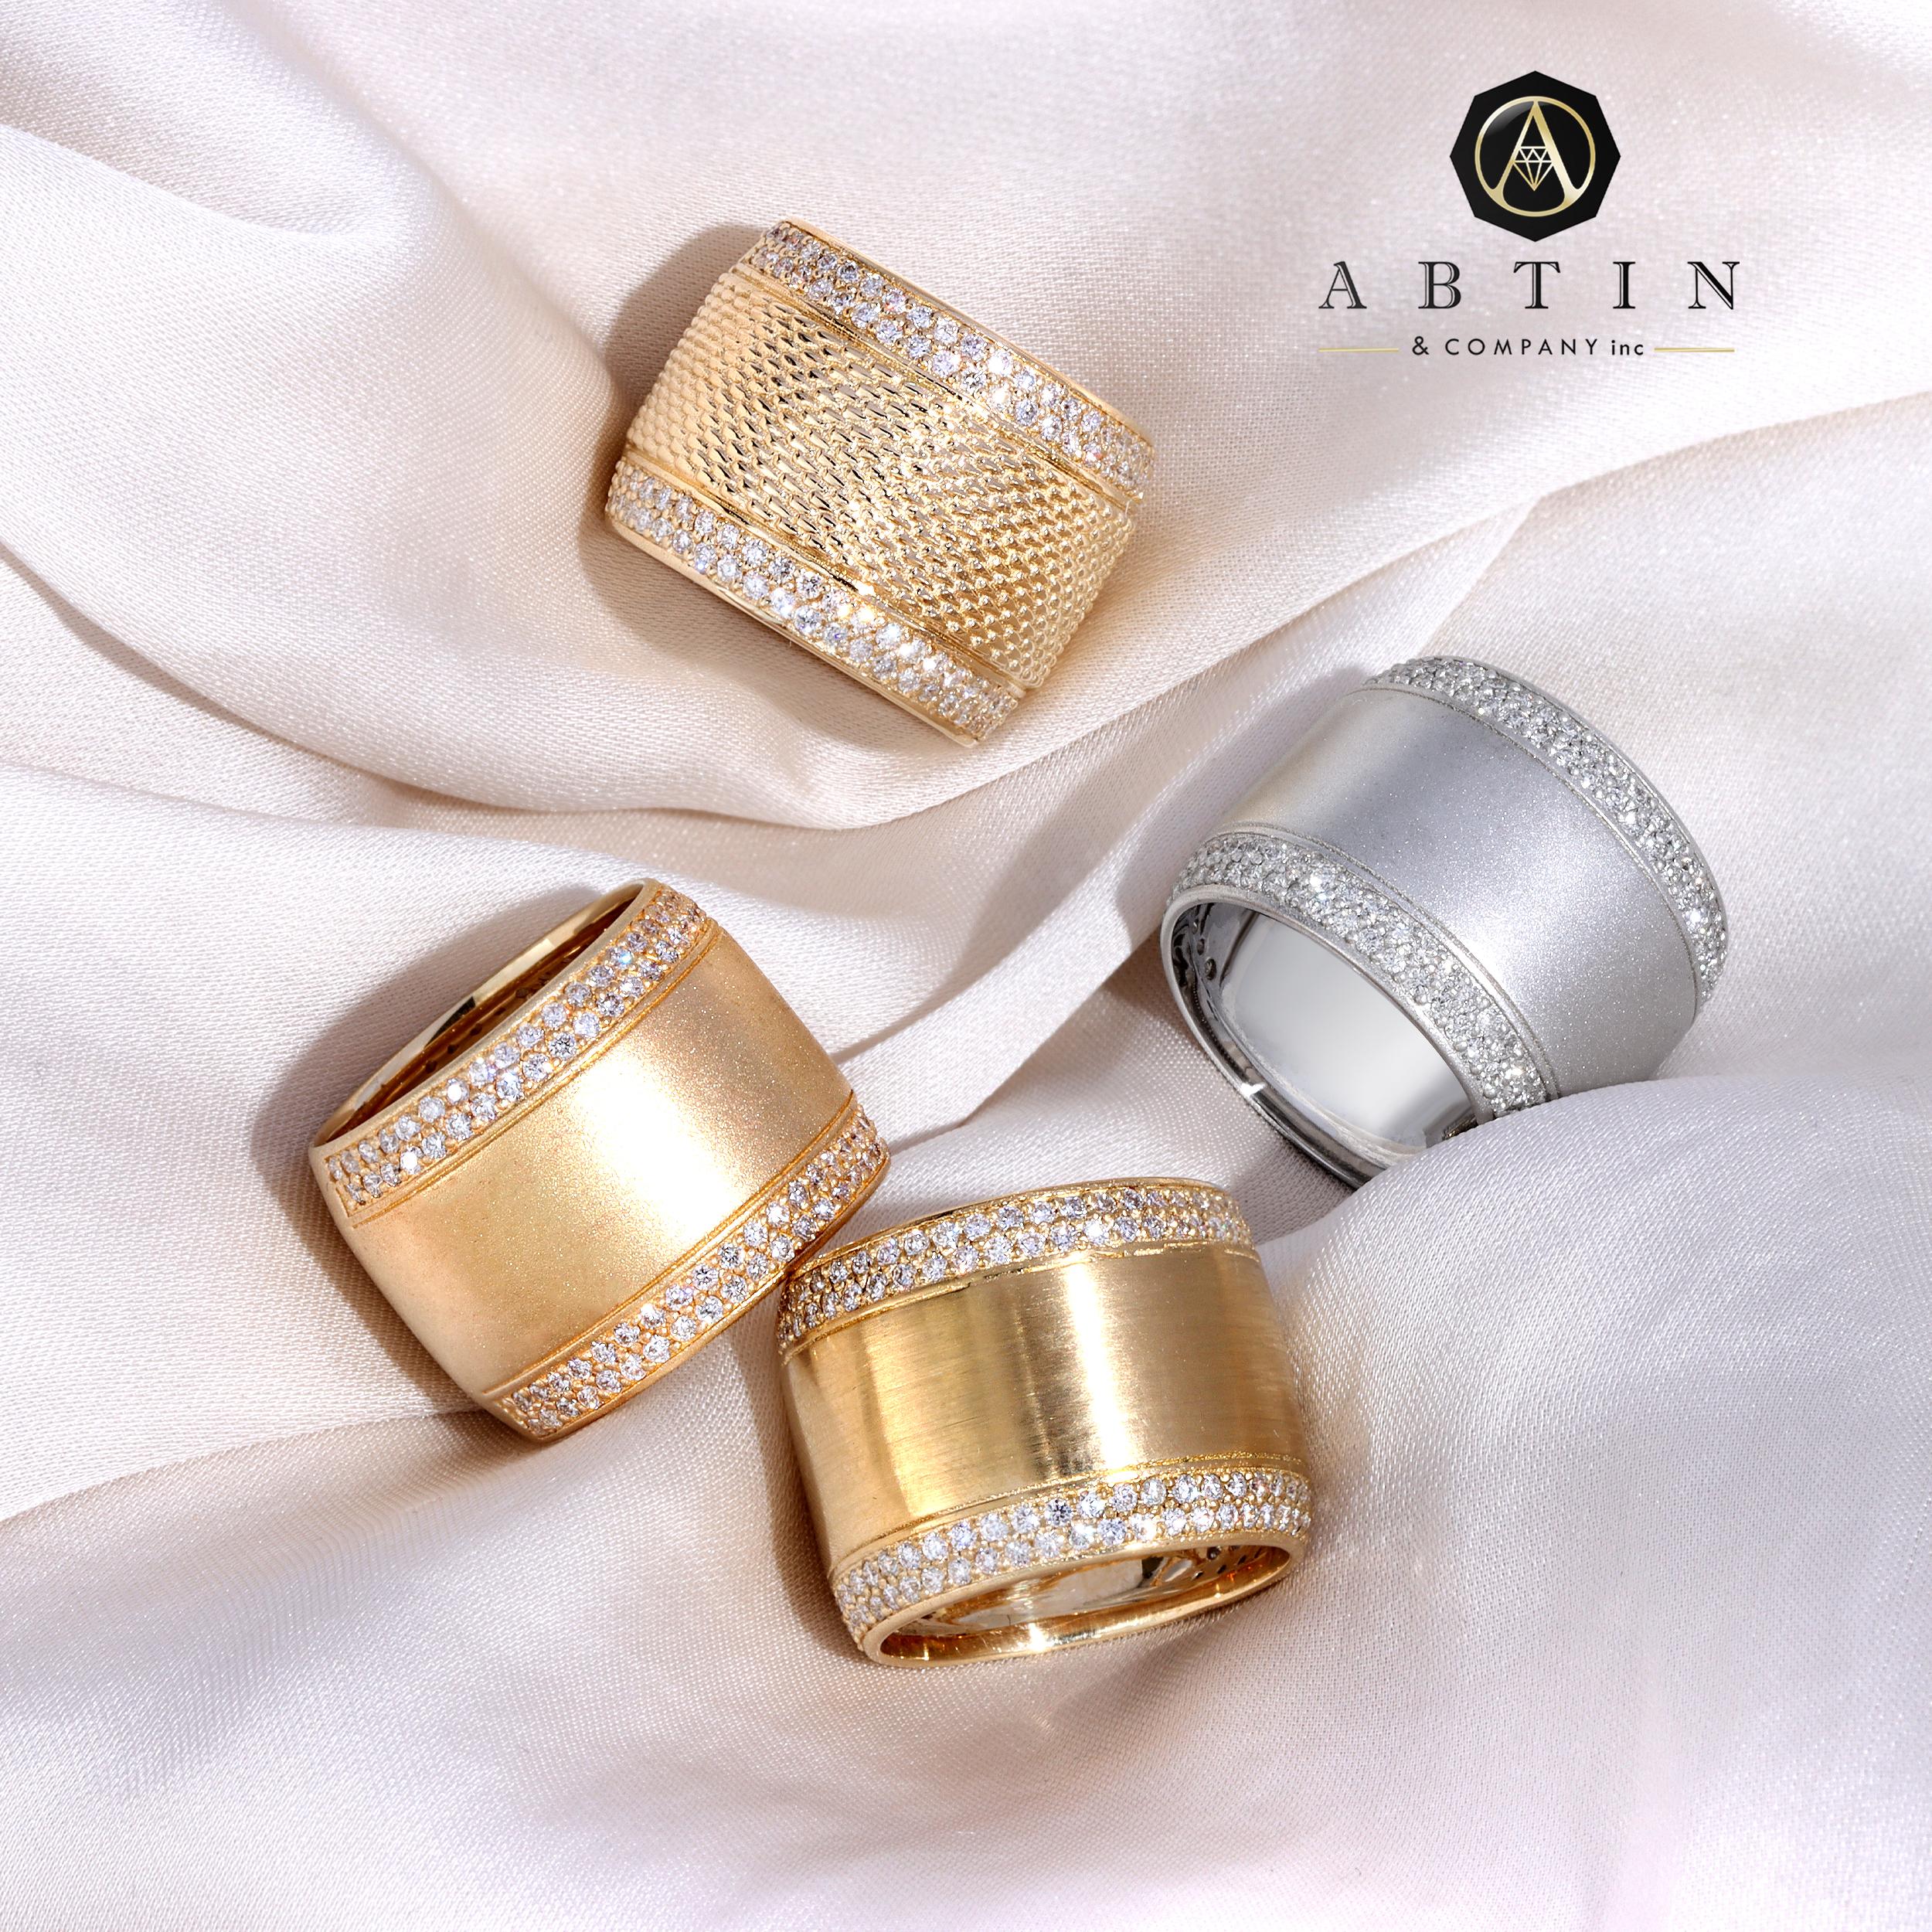 This captivating 14K gold cigar ring showcases two rows of exquisite diamond detailing along a patterned band. A bold statement piece, it's ideal for daily wear and comes in yellow, white, and rose gold options.

Gold Weight: 8.50 gr.
Diamond